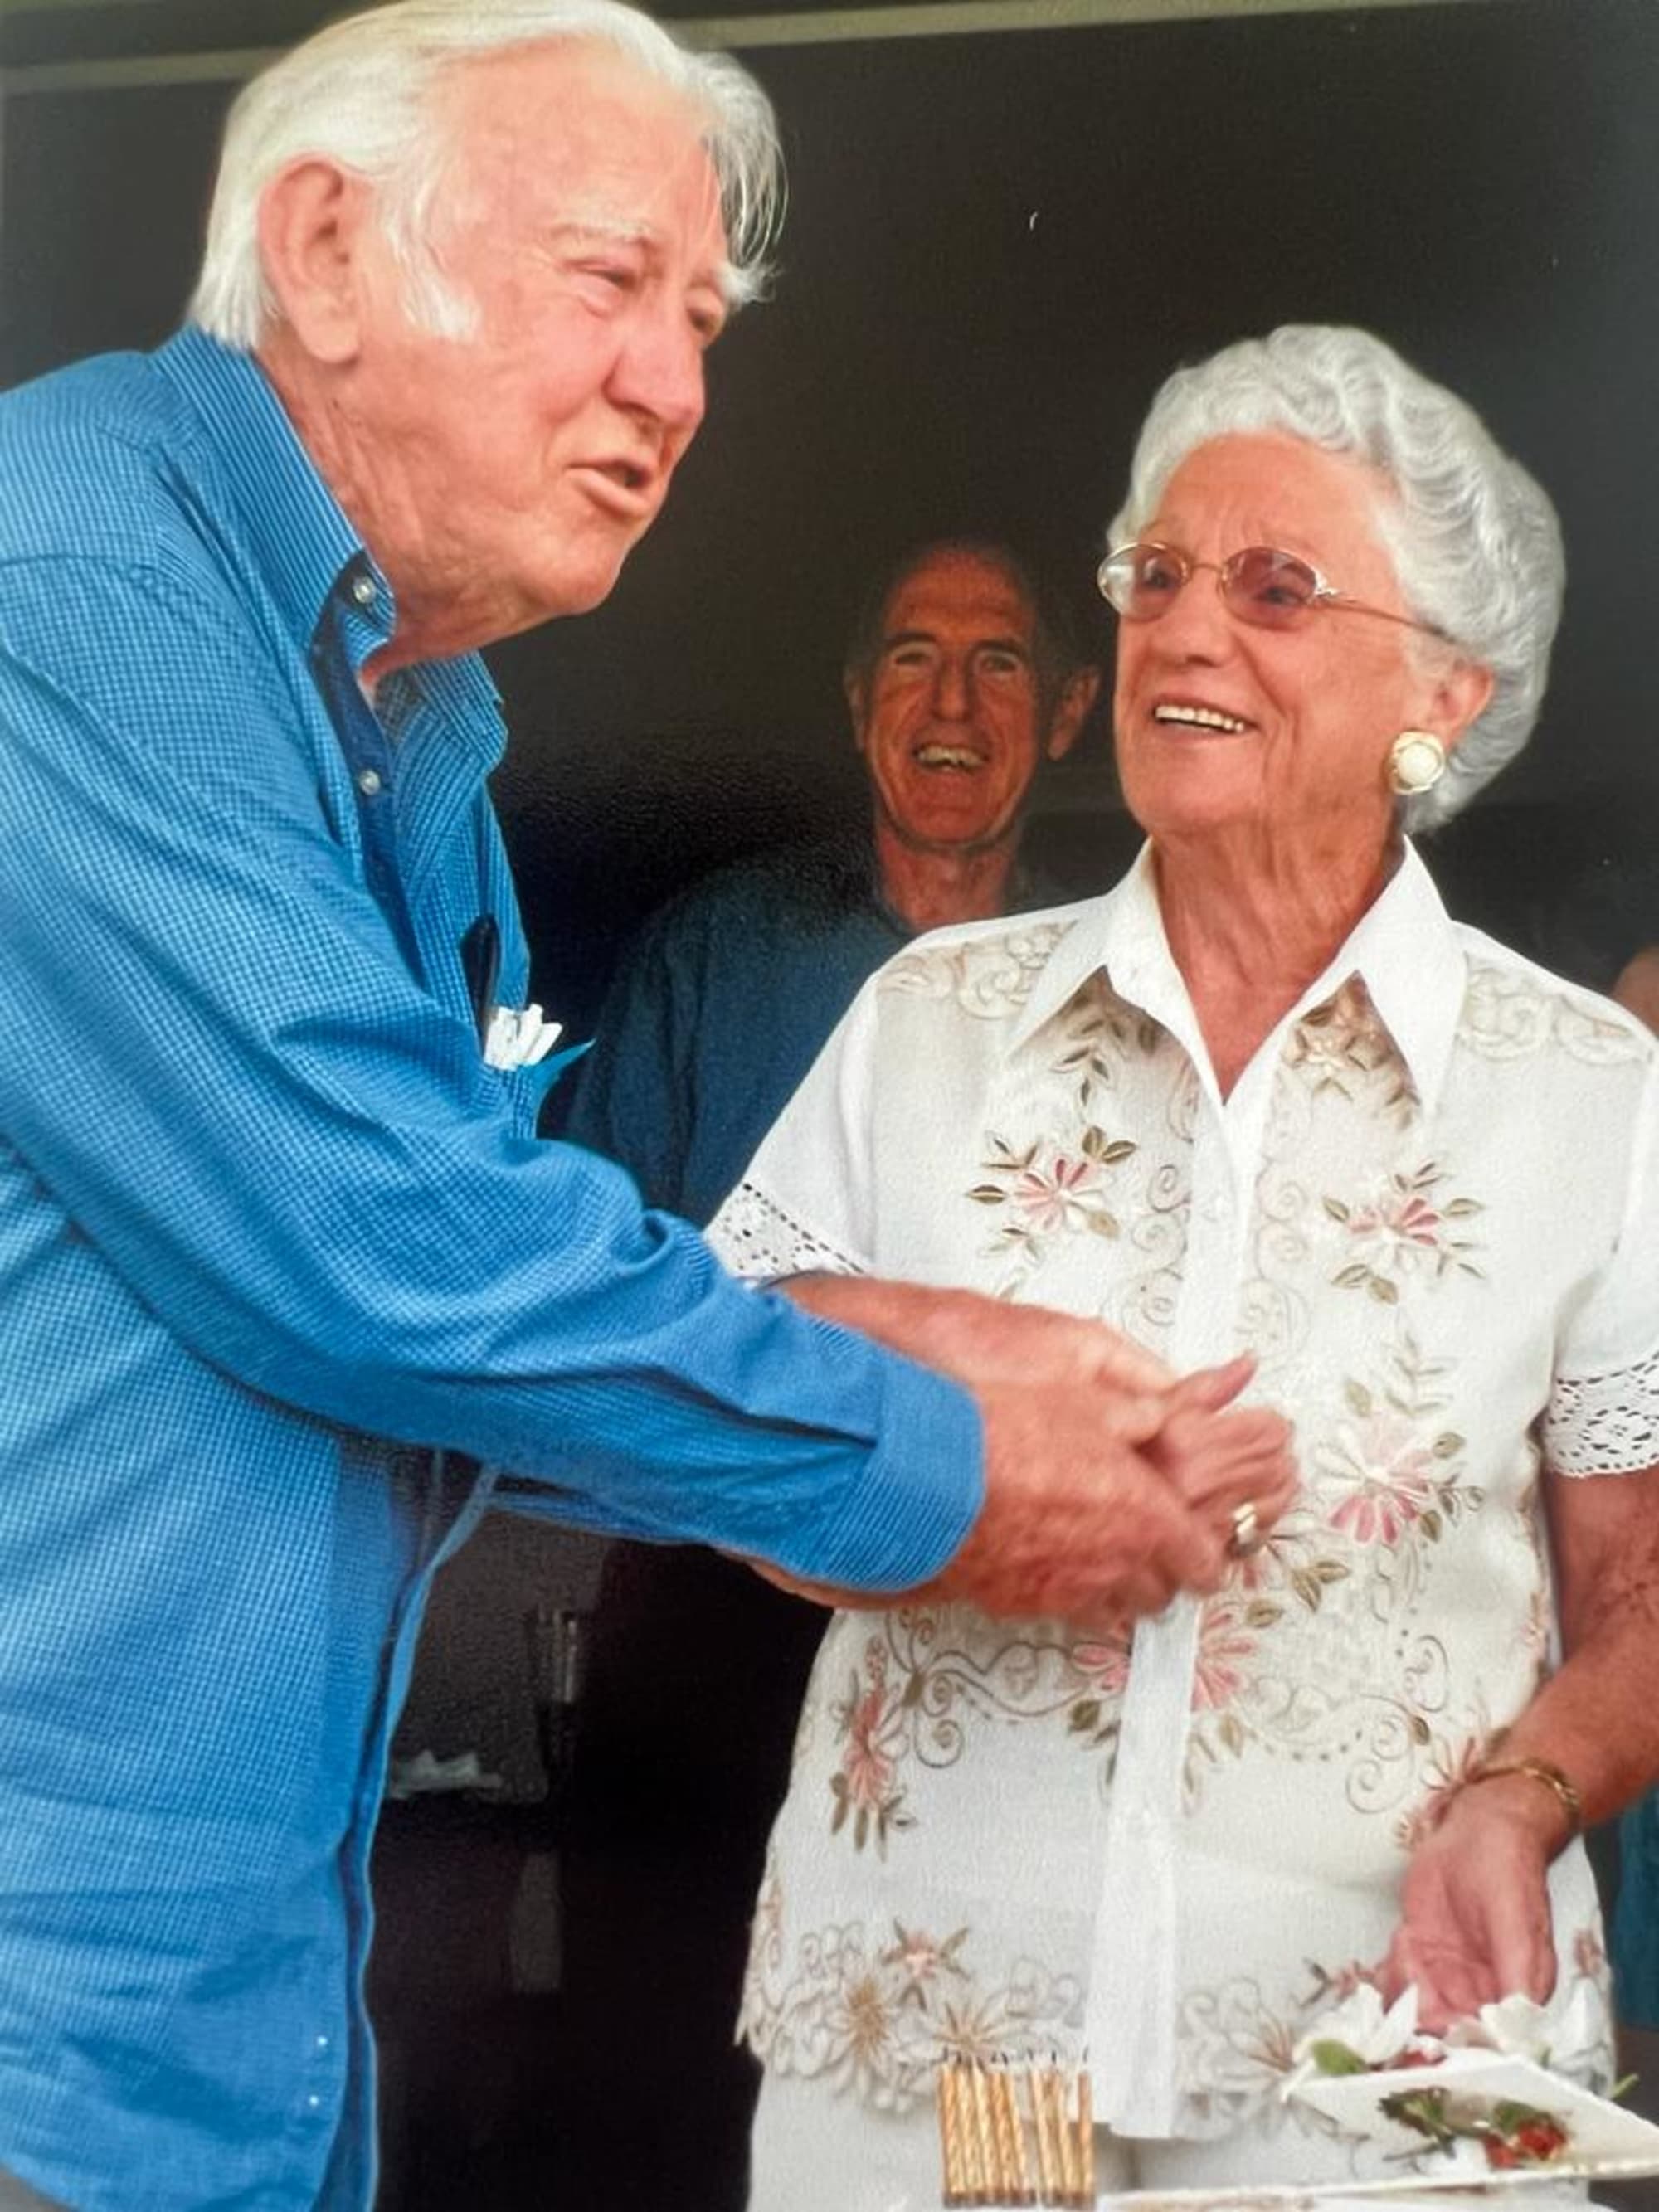 Hughie and Shirley O'Keefe, celebrating their joint 80th birthdays.